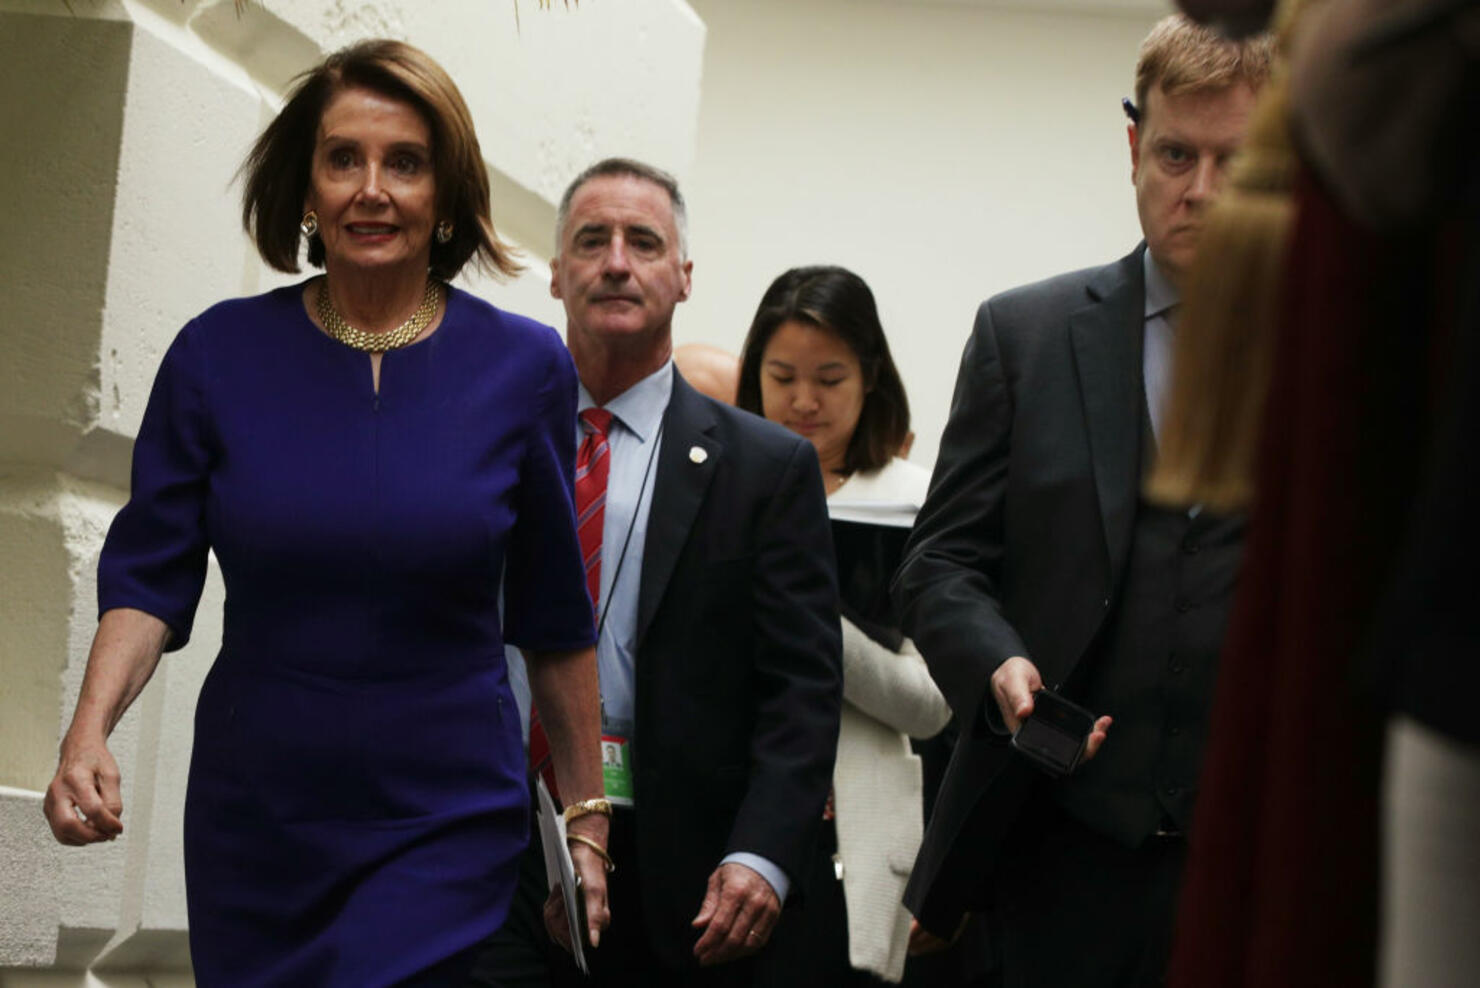 House Speaker Nancy Pelosi Meets With House Democrats Over Growing Calls For Impeachment